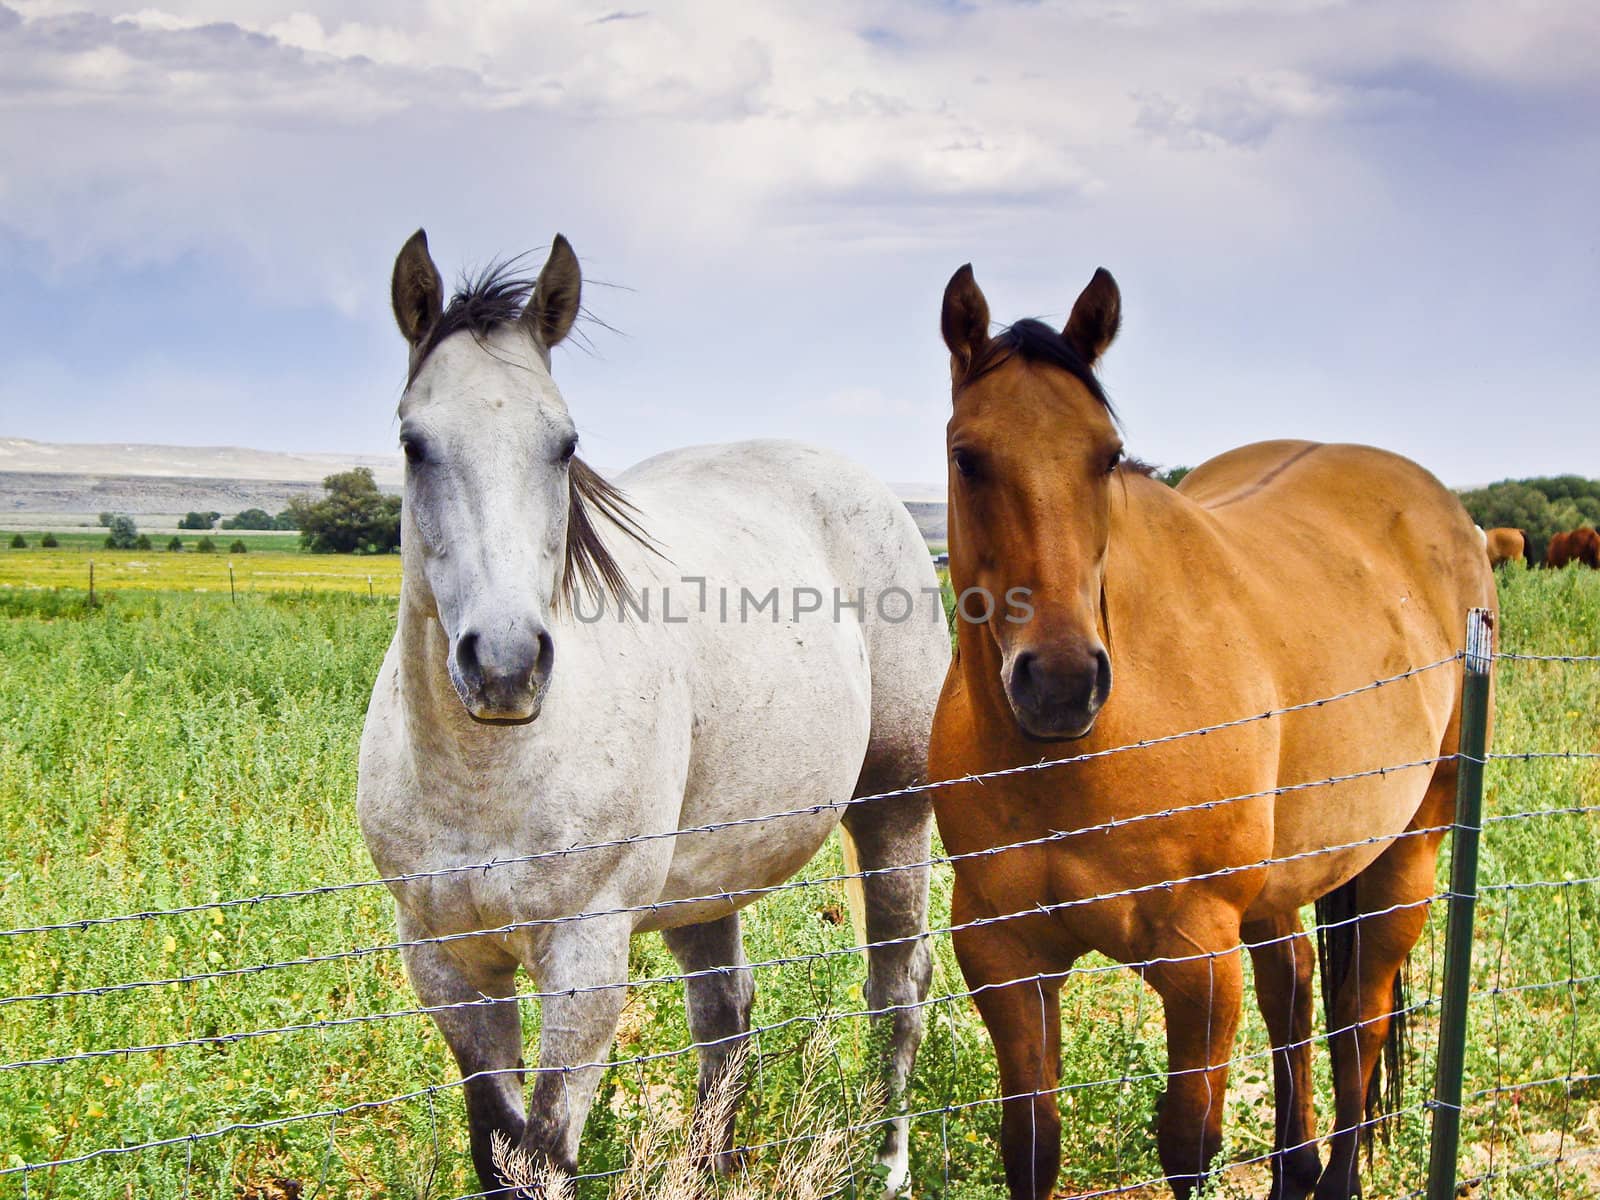 Two Horses, One Brown, One White  by emattil